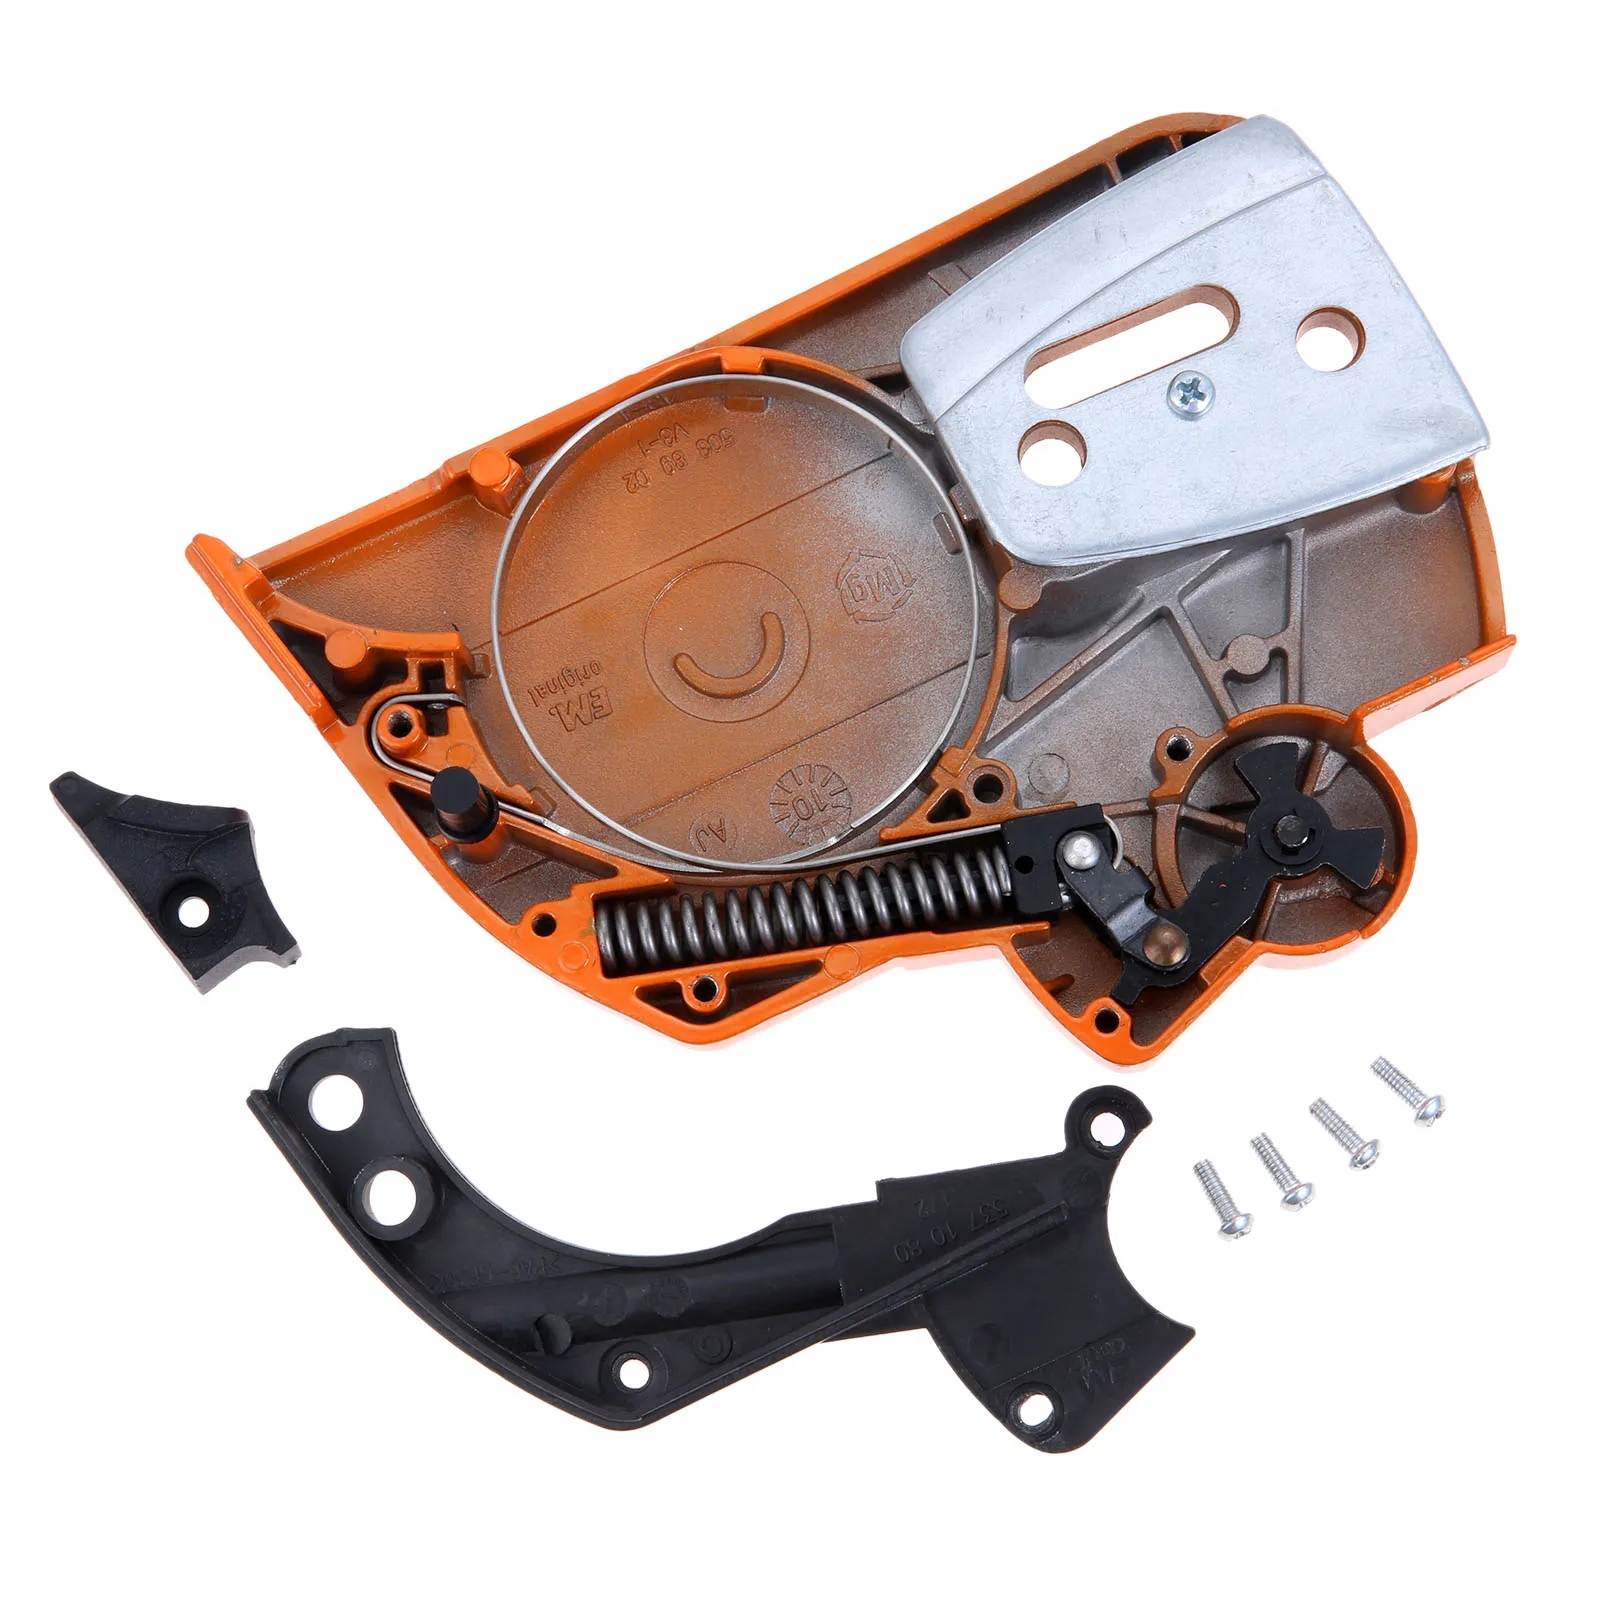 Mtanlo Chain Brake Side Sprocket Clutch Cover for Husqvarna 357XP 359 340  345 346XP 350 353 Chainsaw 537107803 Replacement Part